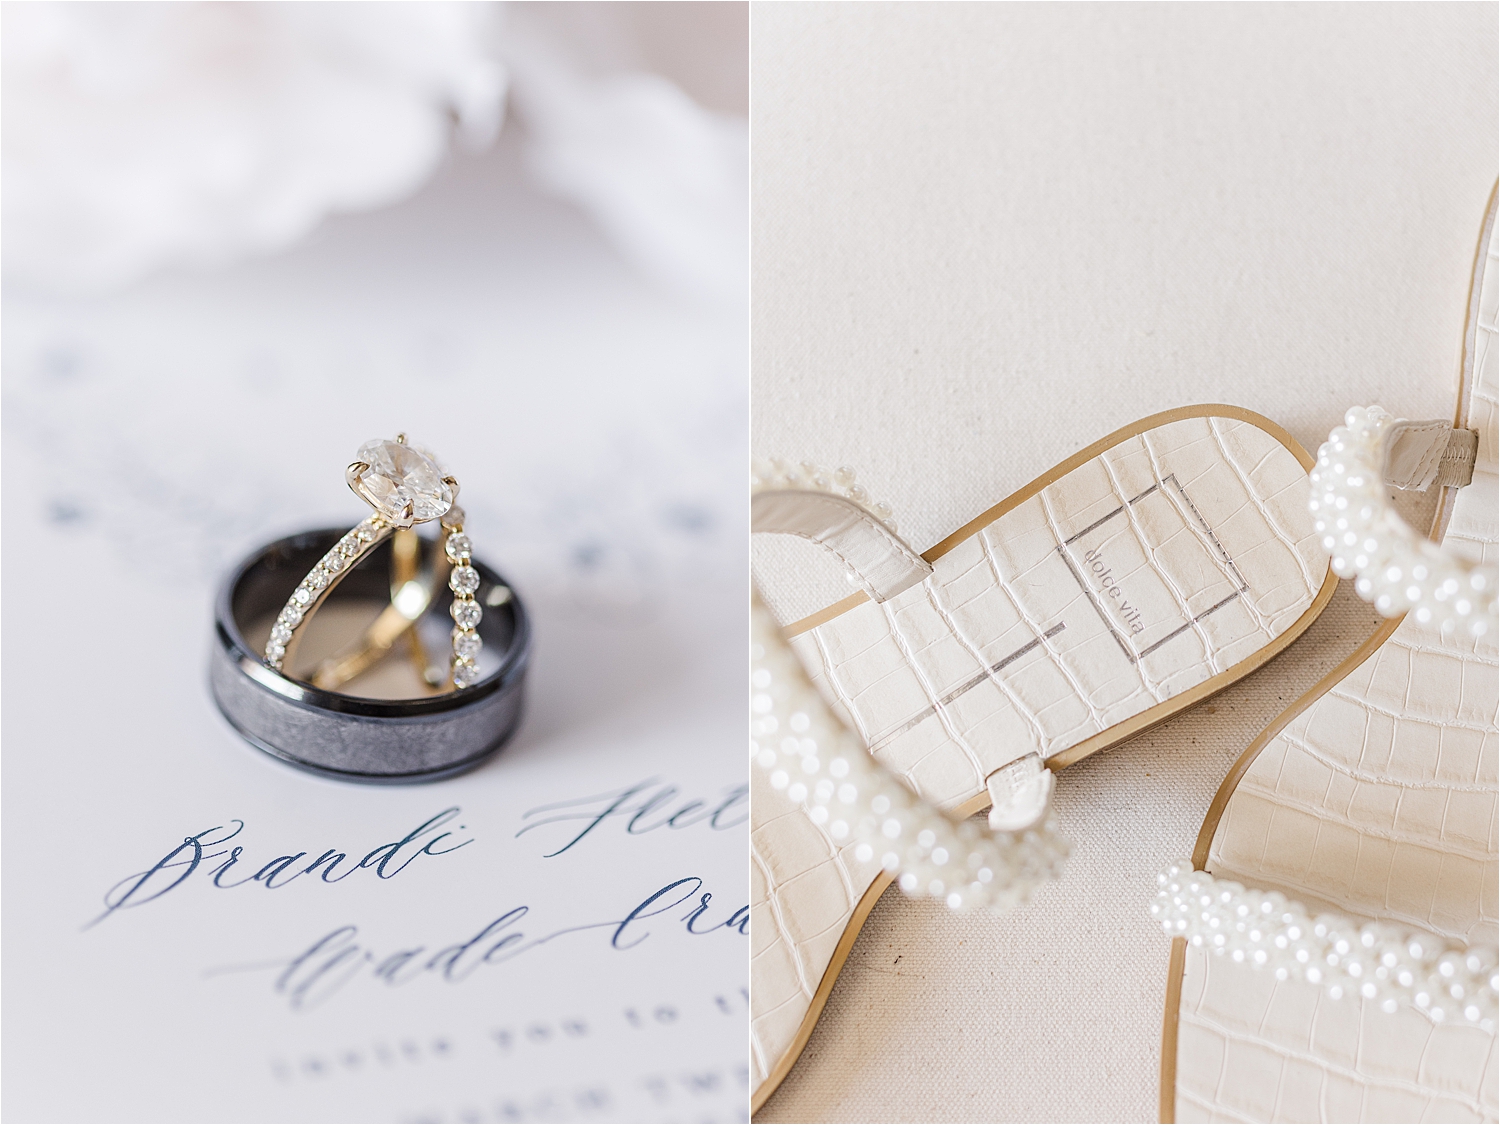 Bride and groom's rings at their Dream Point Ranch Wedding